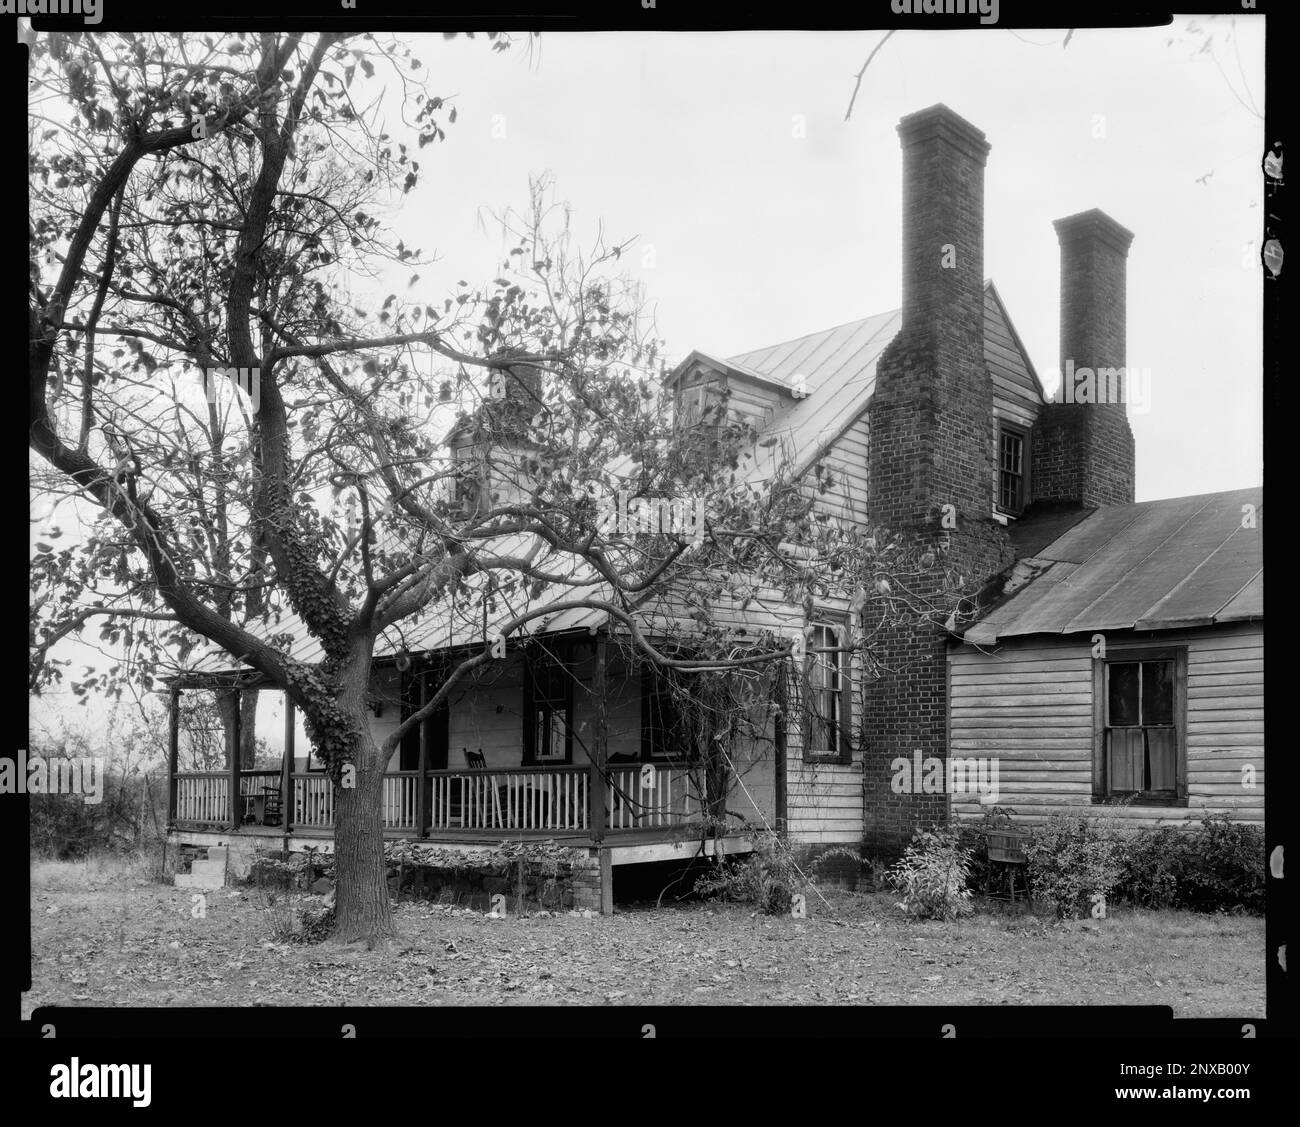 Waddell, Contea di Albemarle, Virginia. Carnegie Survey of the Architecture of the South. Stati Uniti Virginia Contea di Albemarle, Porches, Chimneys, Houses. Foto Stock